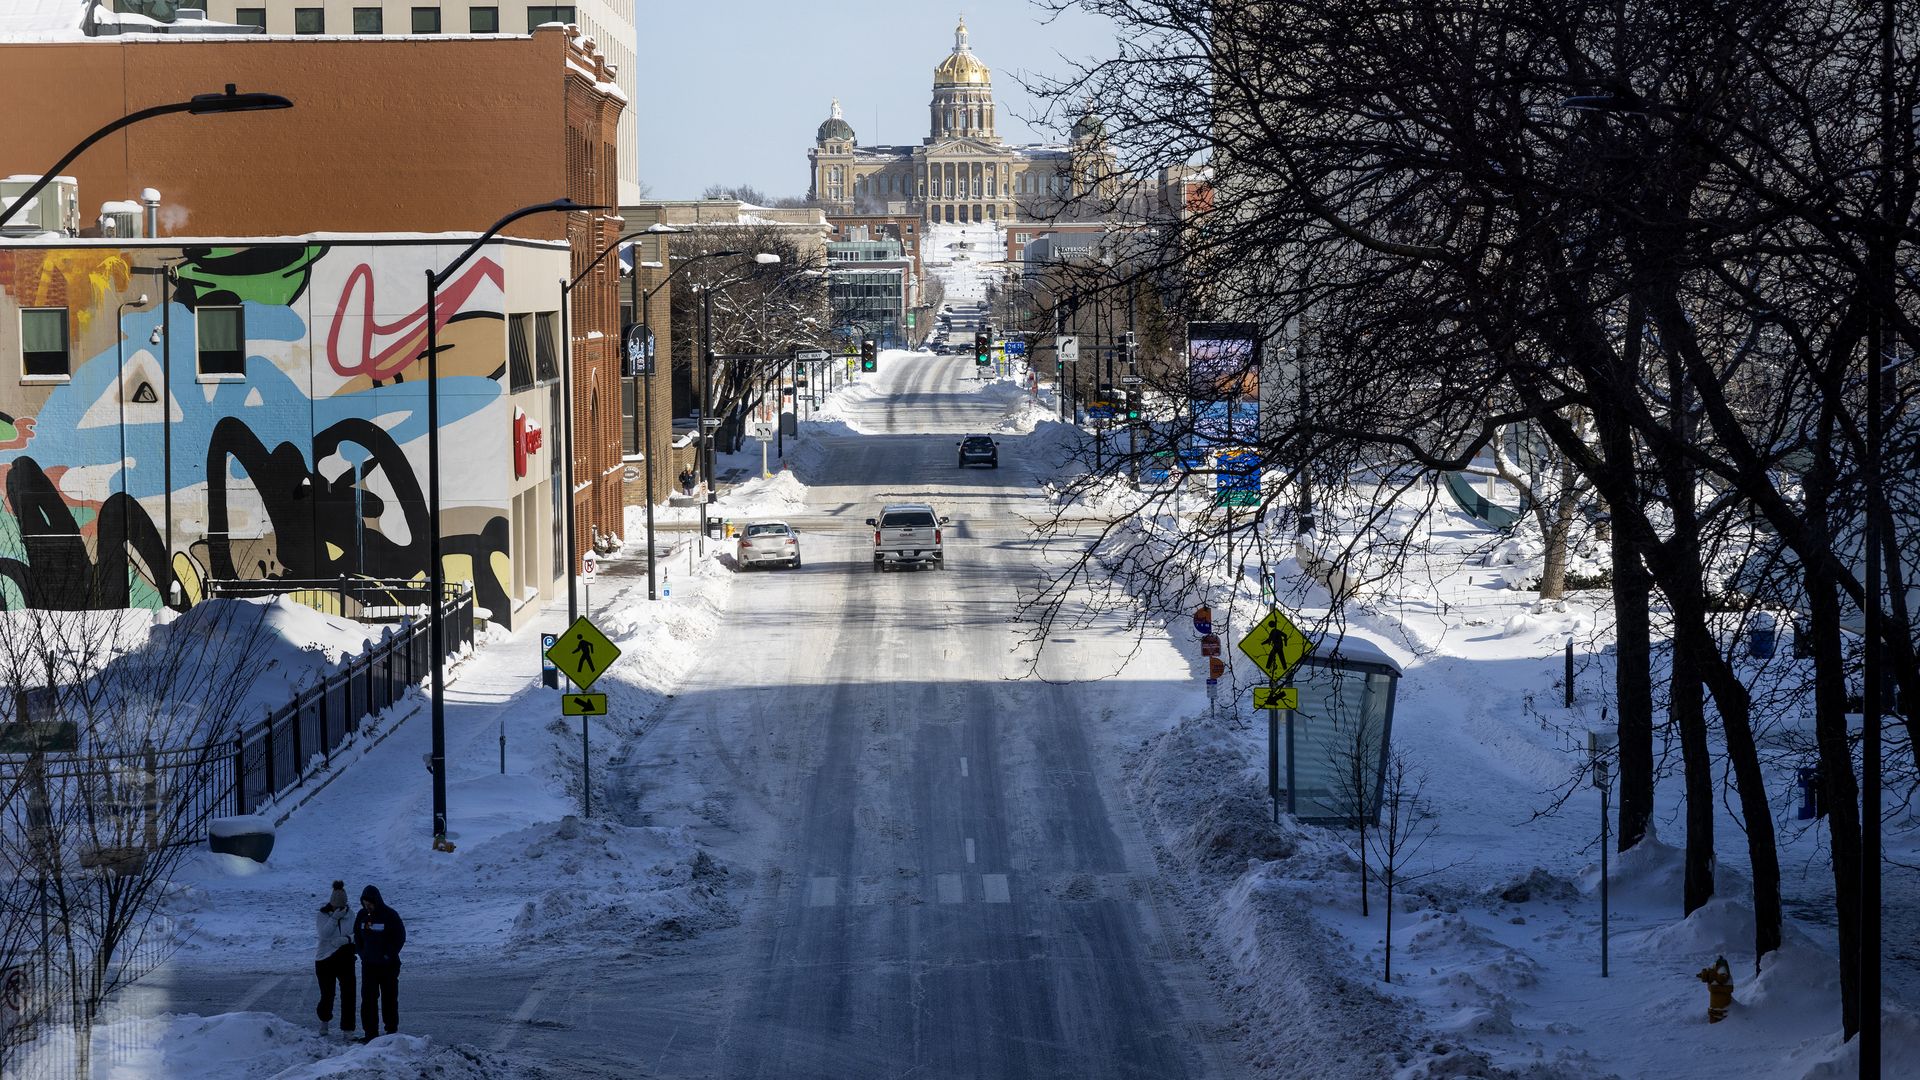  Two pedestrians brave the sub-zero temperatures downtown as extreme temperatures and snow have gripped Iowa during Iowa Caucus week on January 14, 2024 in Des Moines, Iowa.